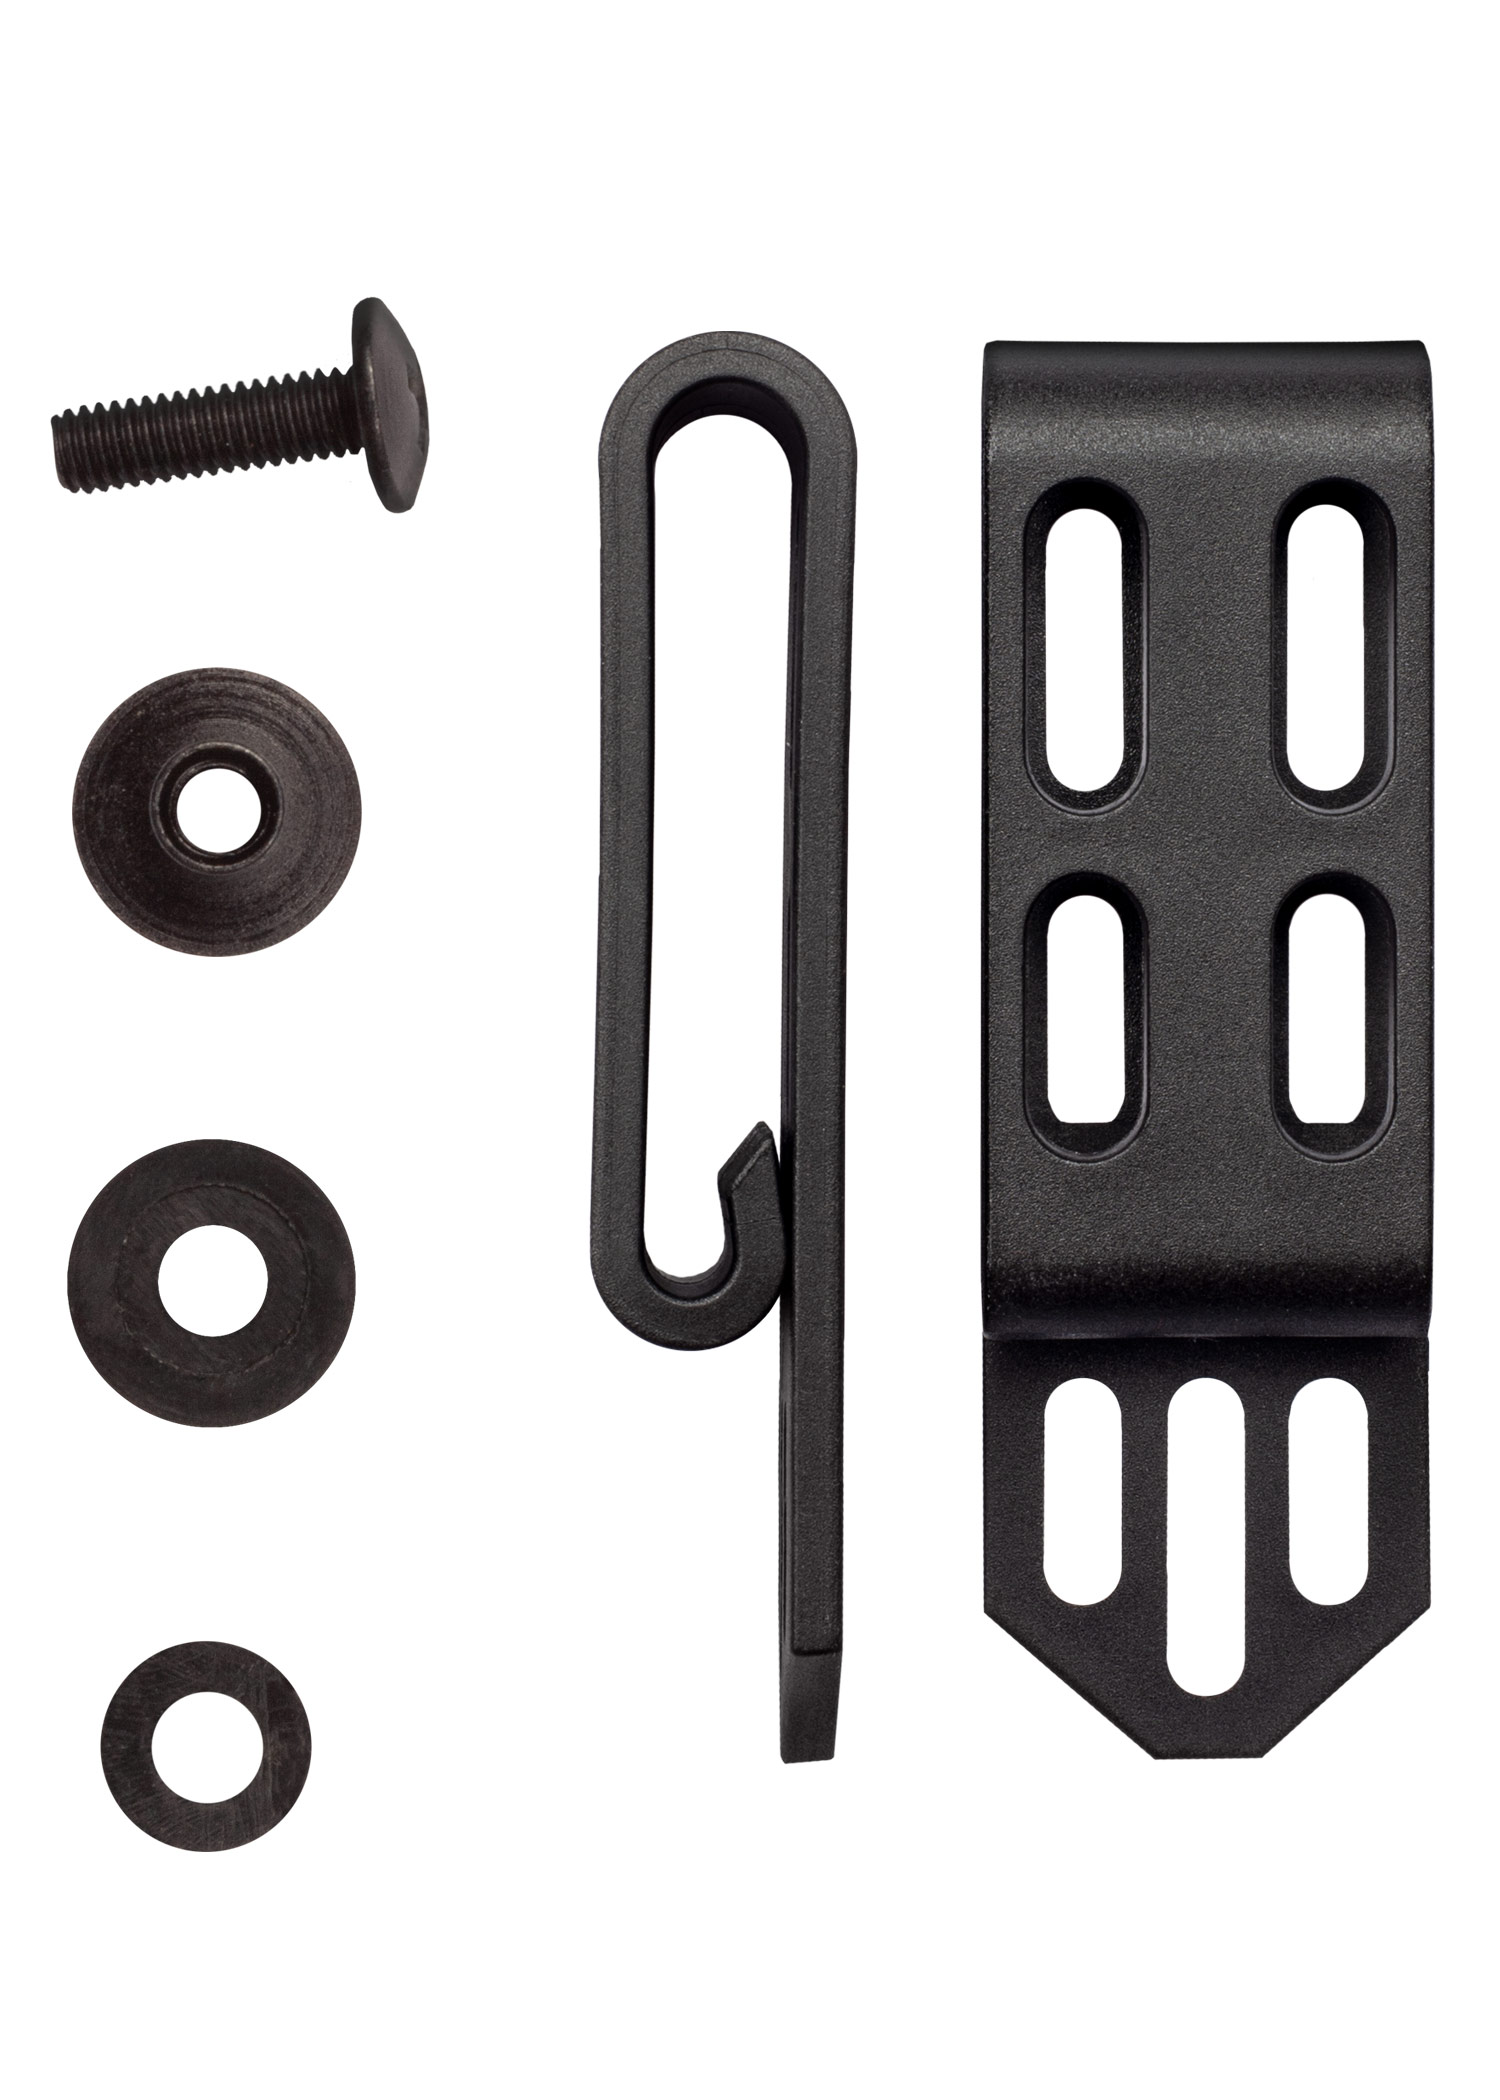 Cold Steel - CSSACLB - Small Secure-Ex C-Clip - 2 Pack - Black - Sharp  Things OKC